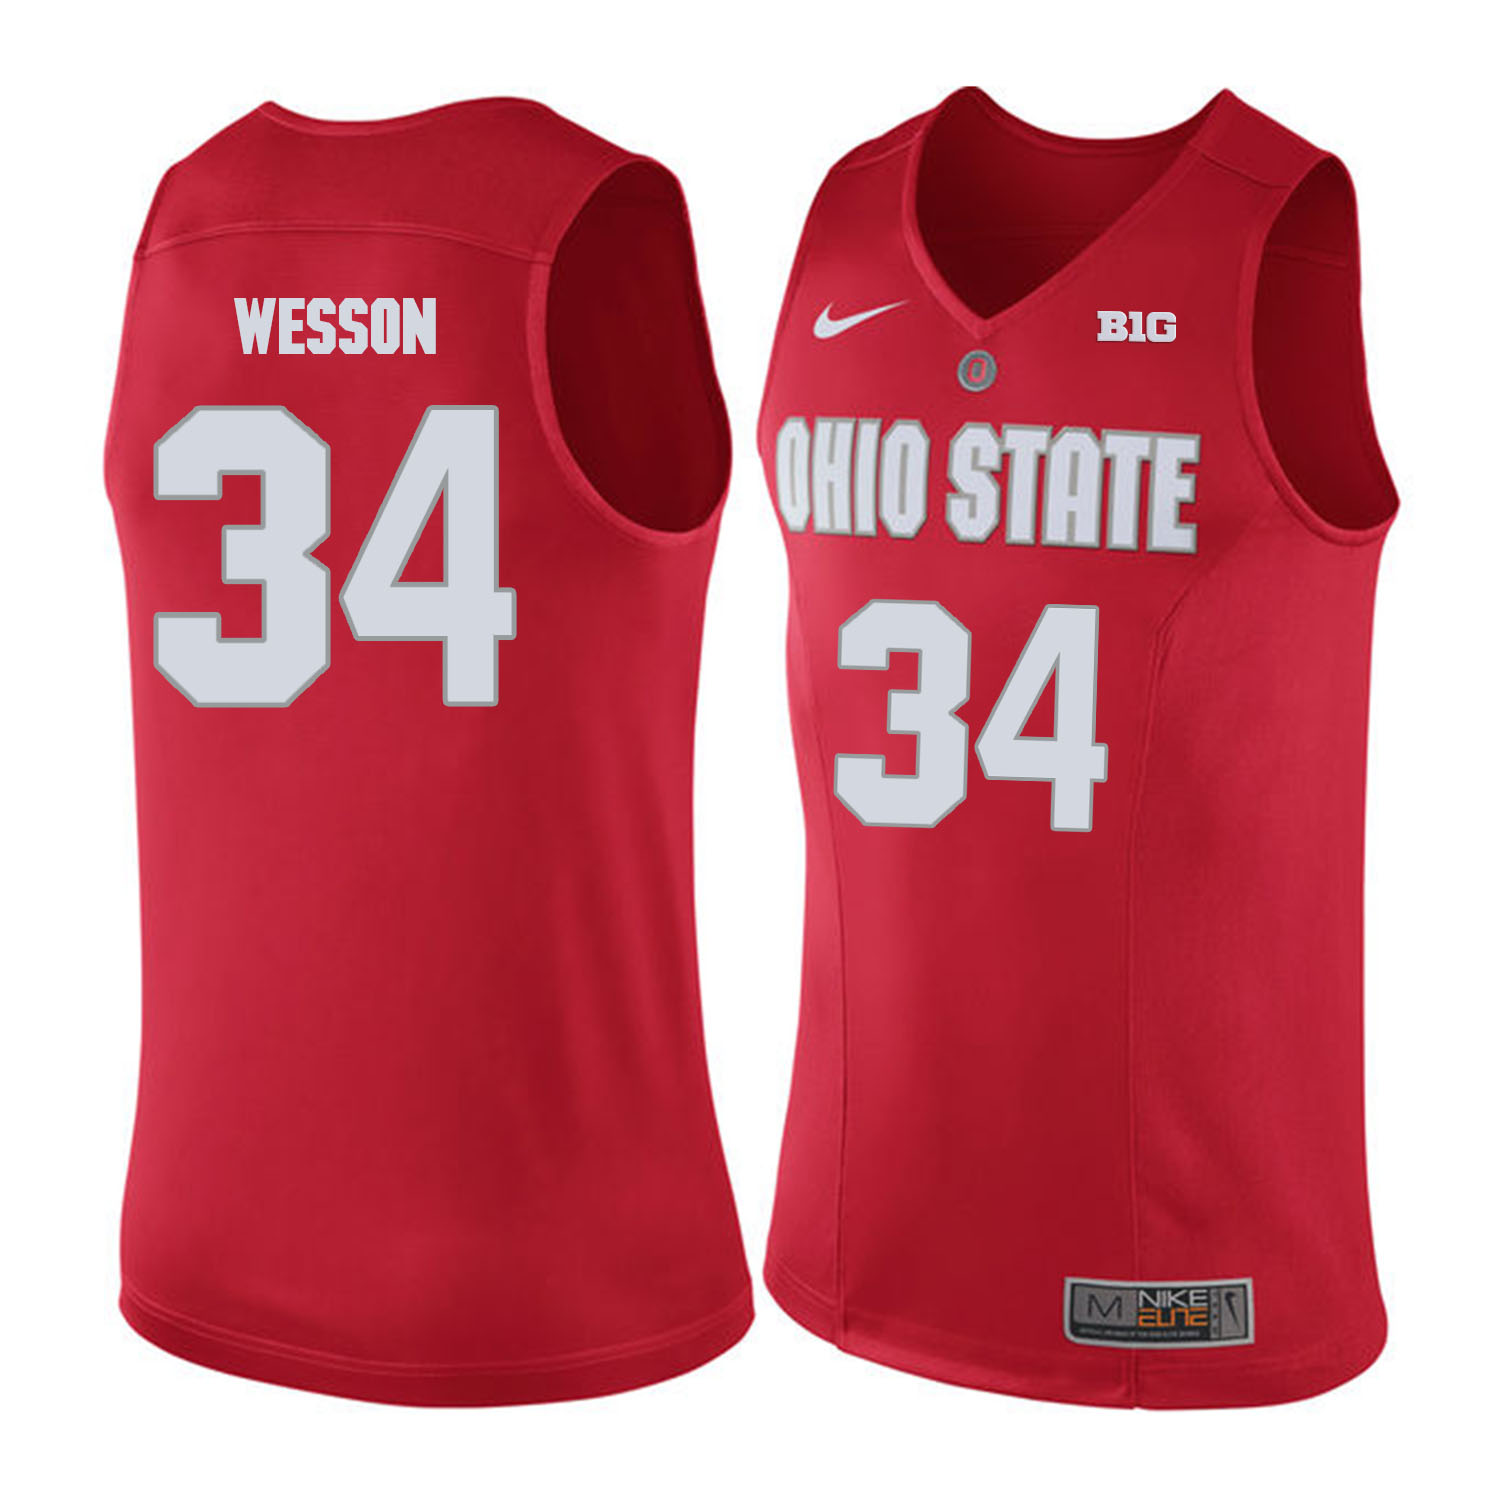 Ohio State Buckeyes 34 Kaleb Wesson Red College Basketball Jersey